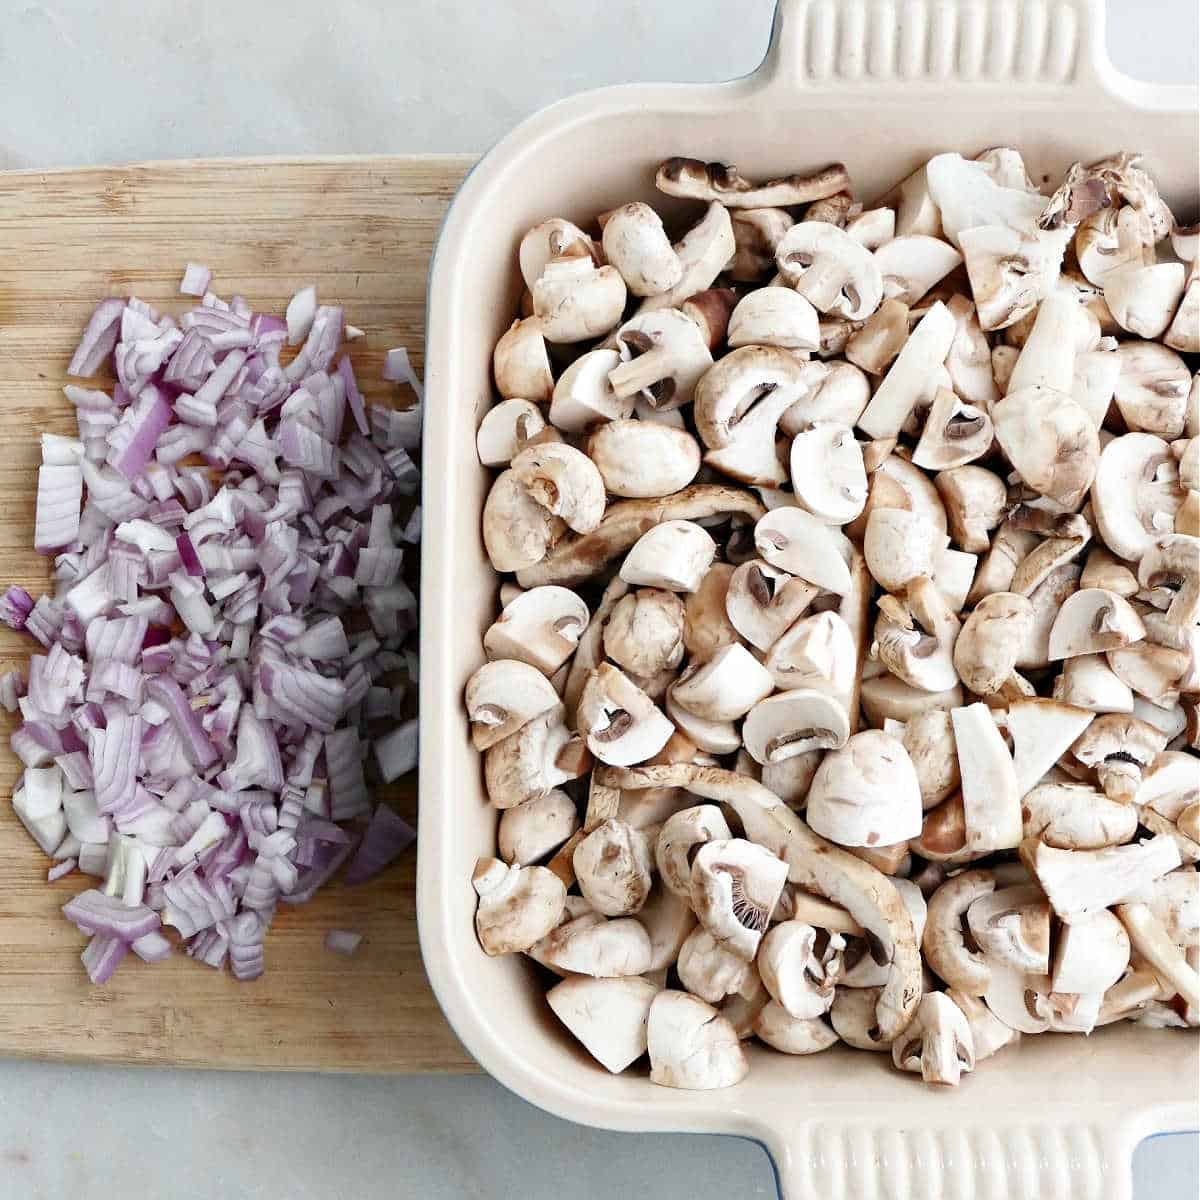 sliced mushrooms and shallots on a cutting board